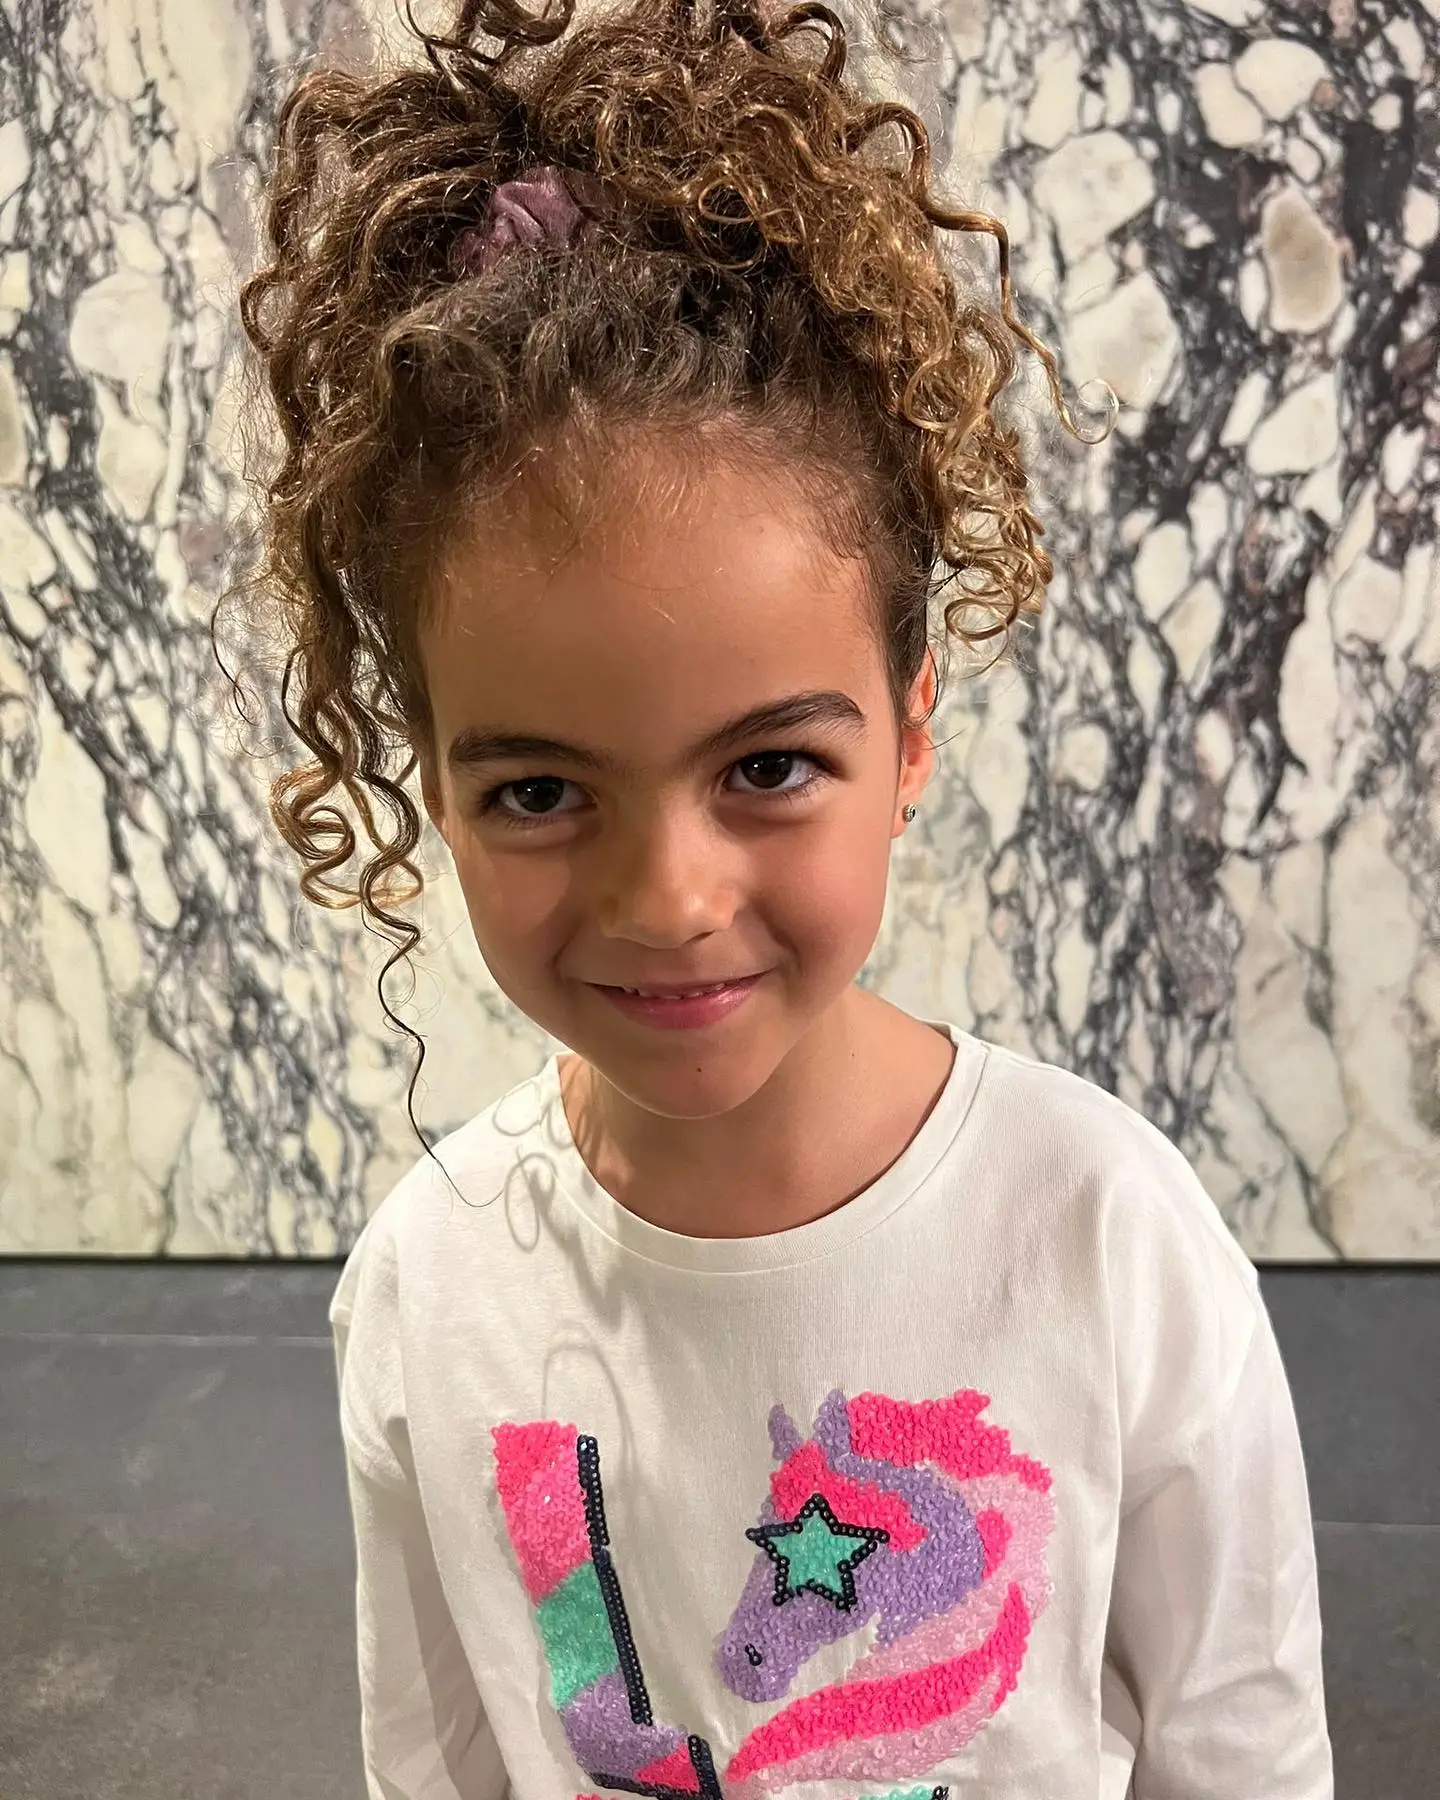 Celebrating Alana: Join the Festivities as We Commemorate Ronaldo’s Daughter’s Sixth Birthday! Get a Behind-the-Scenes Glimpse into the Memorable Day